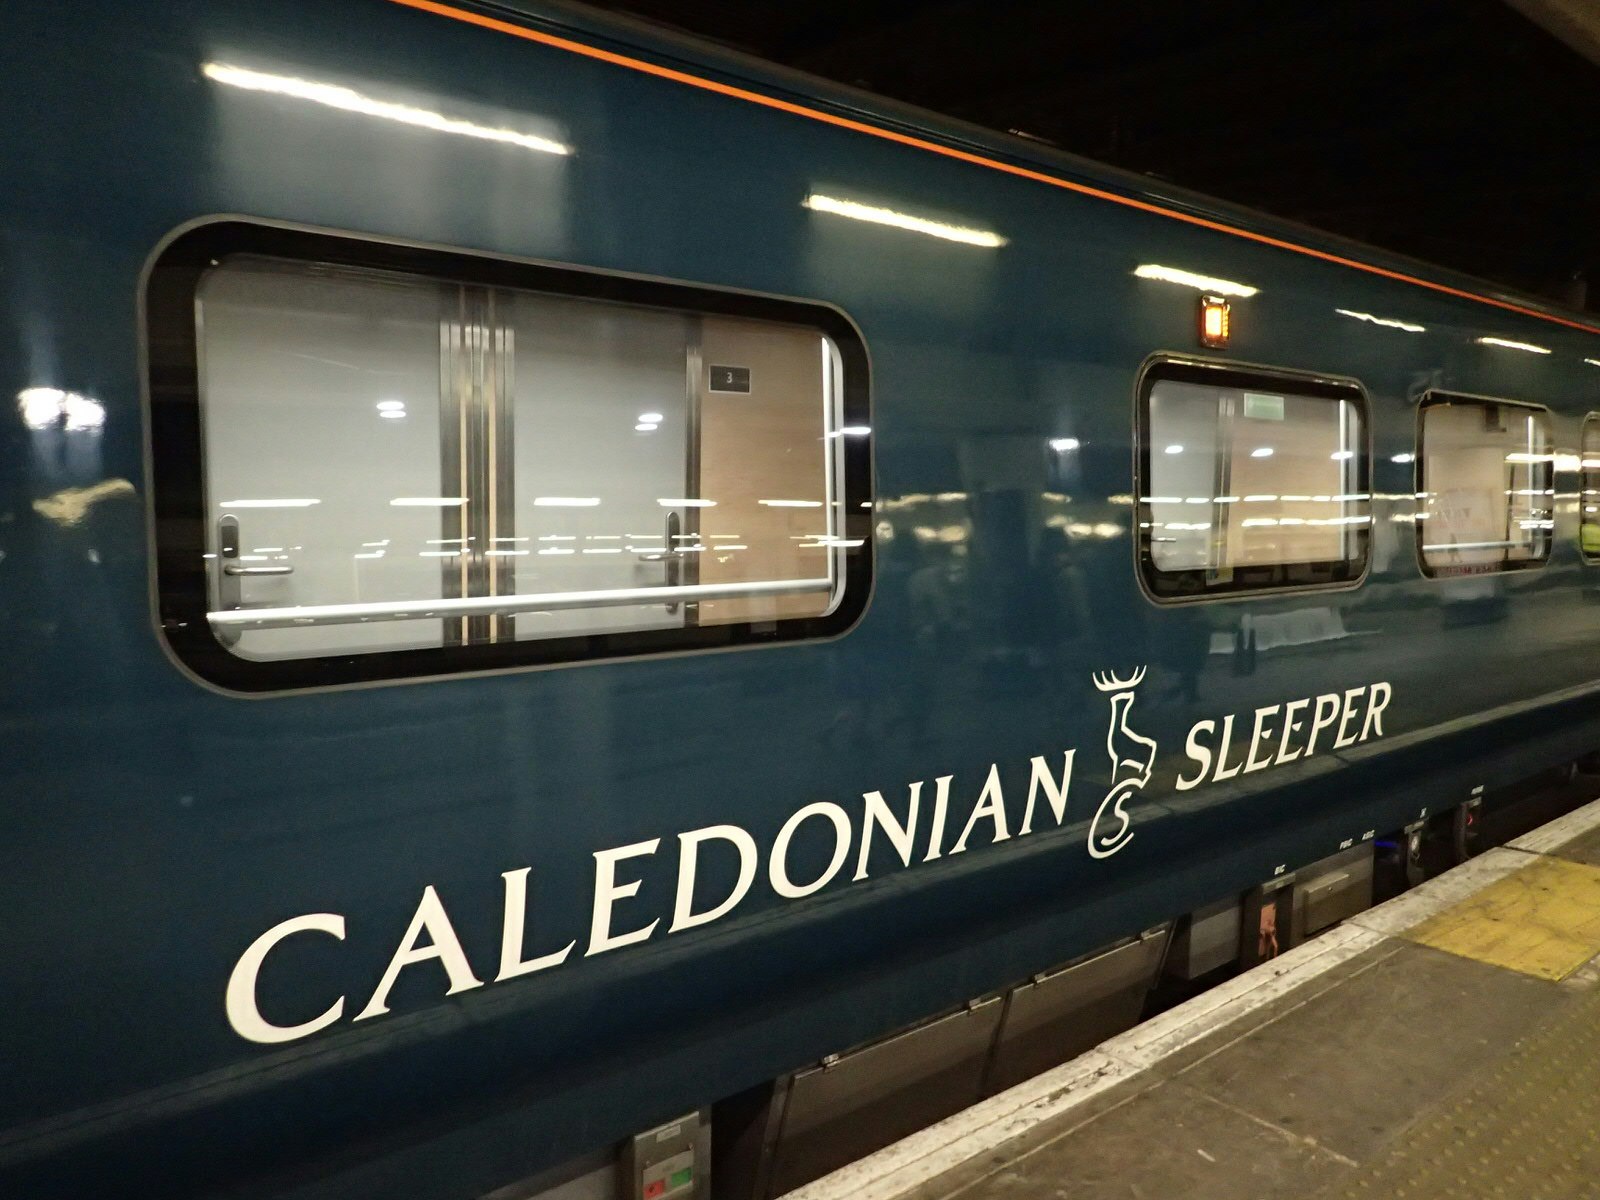 Caledonian Sleeper train exterior. The logo is written in white against the dark green body of the train carriage. 